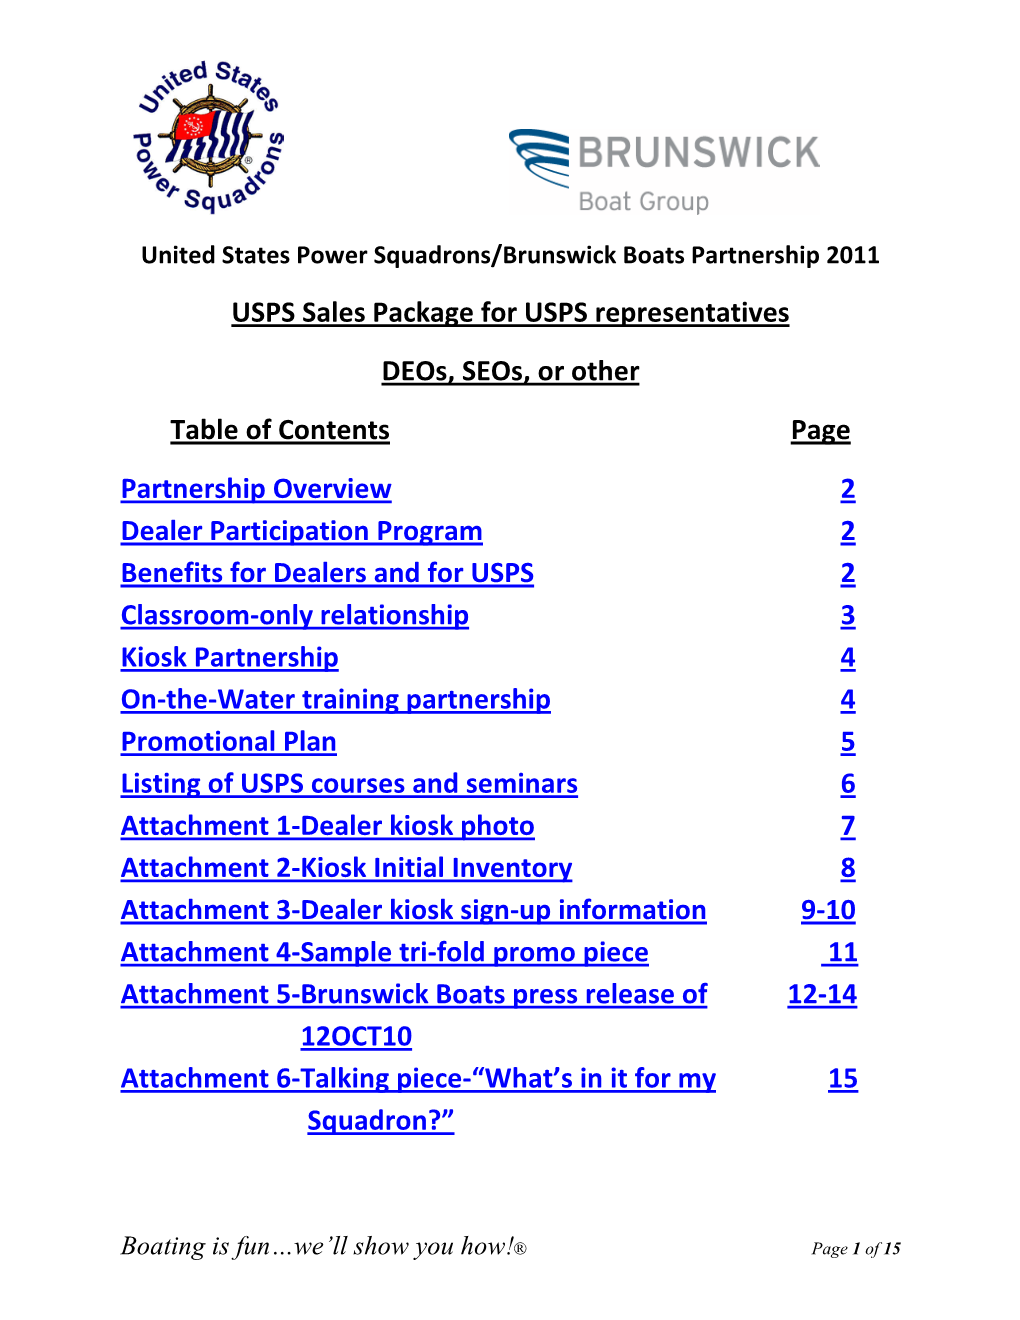 USPS Sales Package for USPS Representatives Deos, Seos, Or